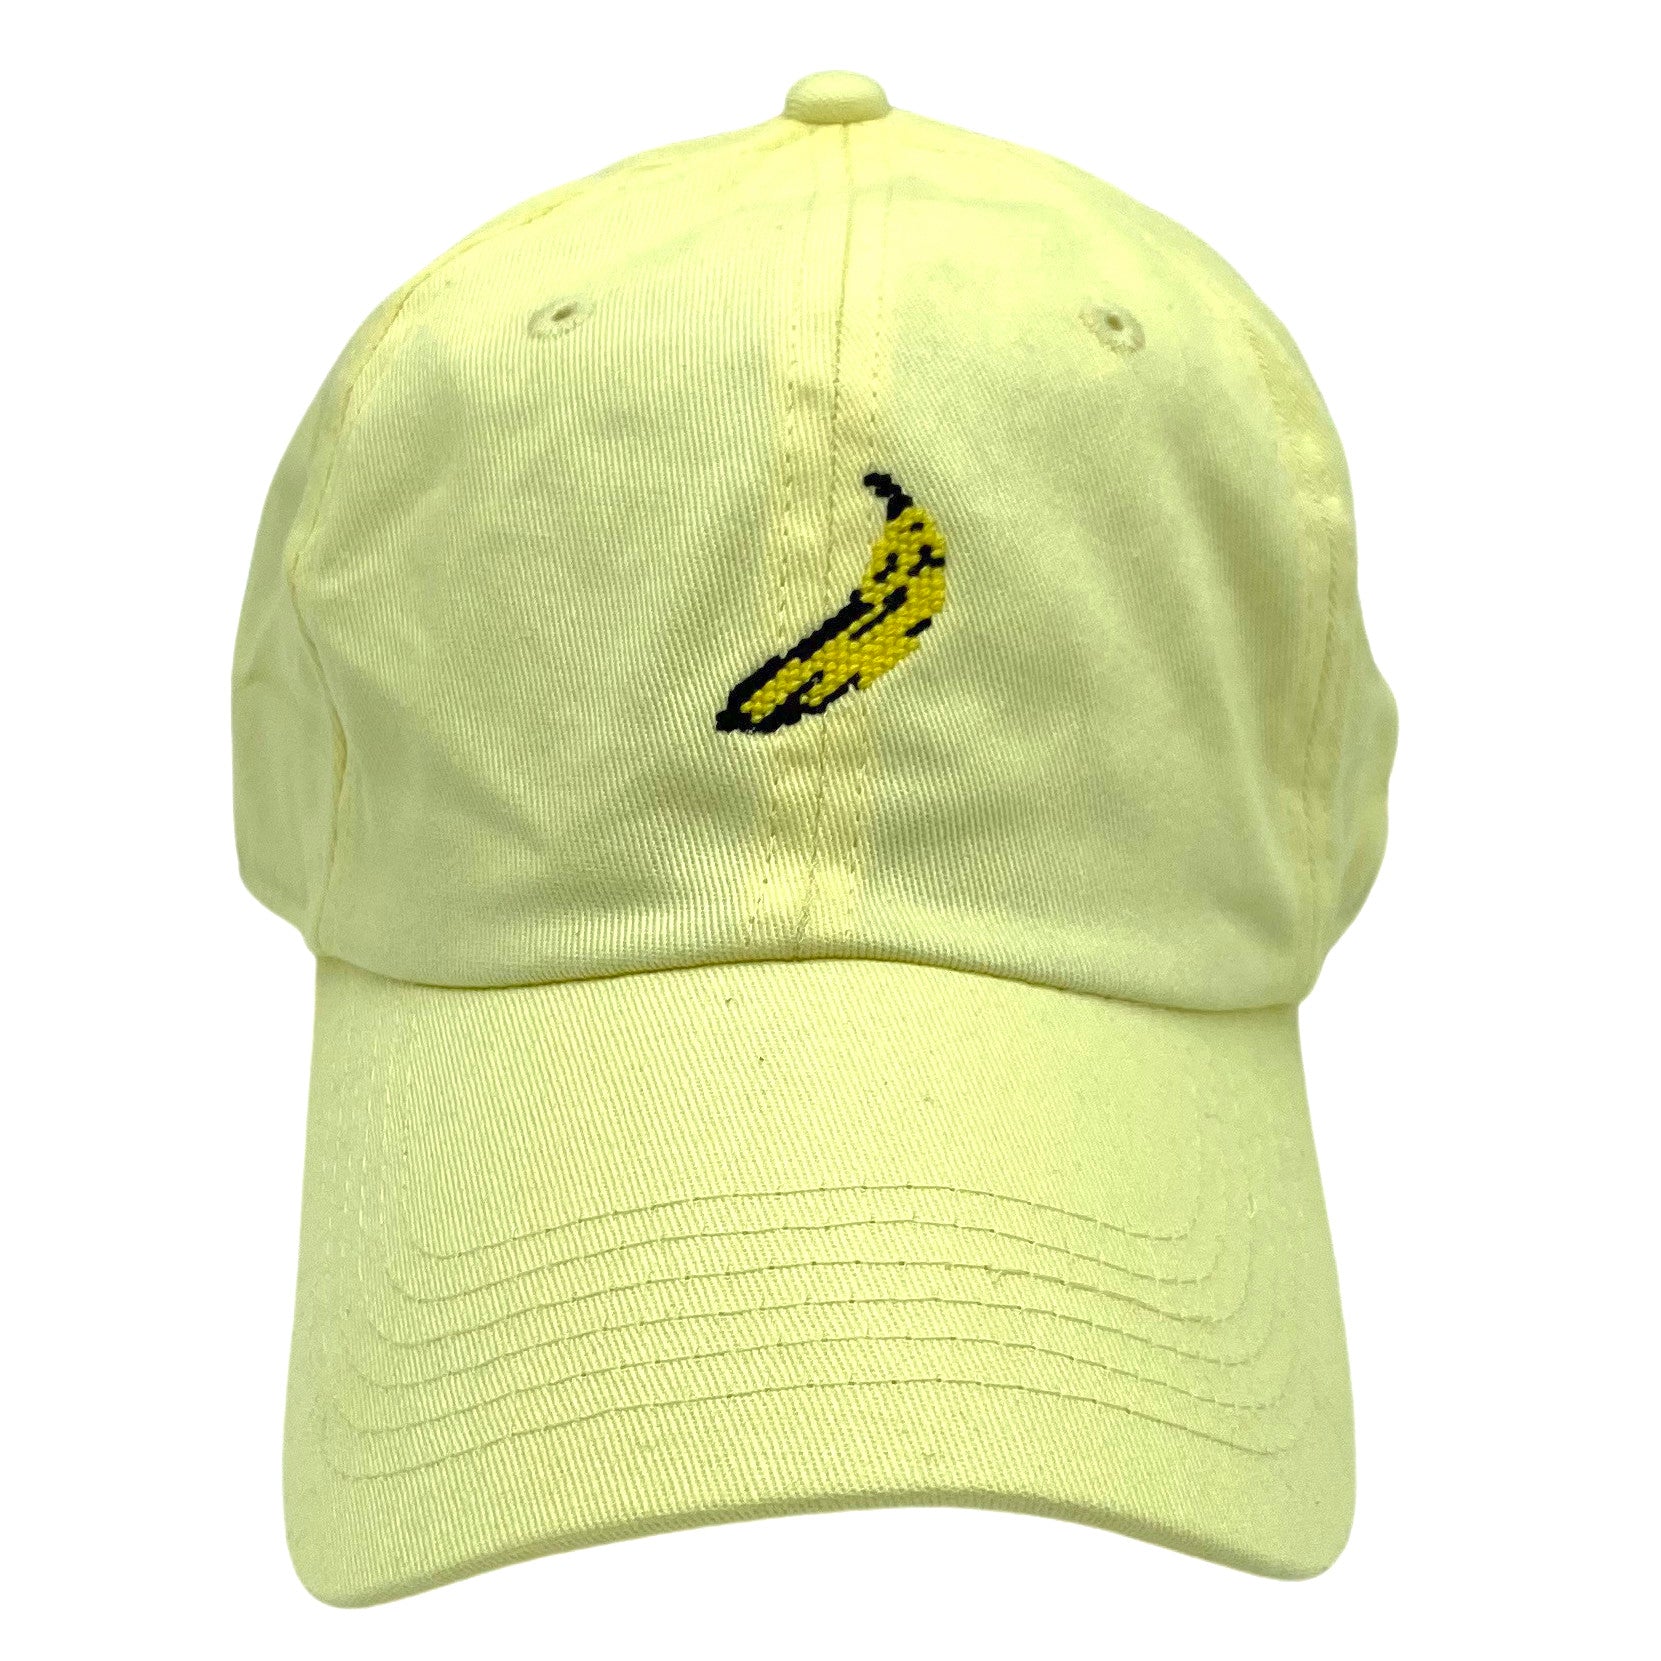 banana on butter yellow hat